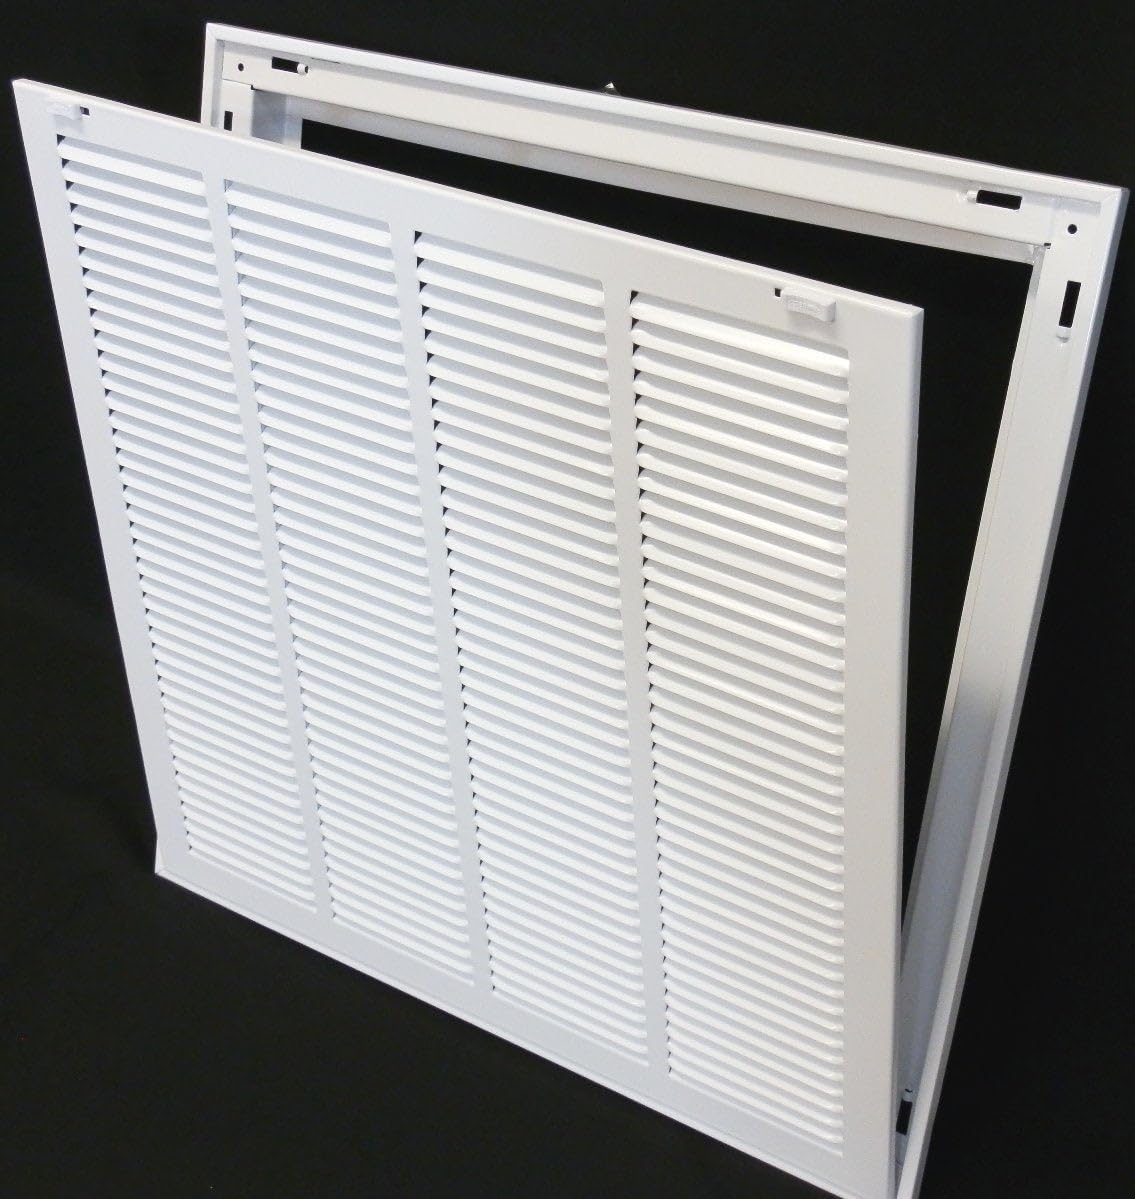 14&quot; X 30&quot; Steel Return Air Filter Grille for 1&quot; Filter - Removable Frame - * Filter Included * [Outer Dimensions: 16 5/8&quot; X 32 5/8&quot;]